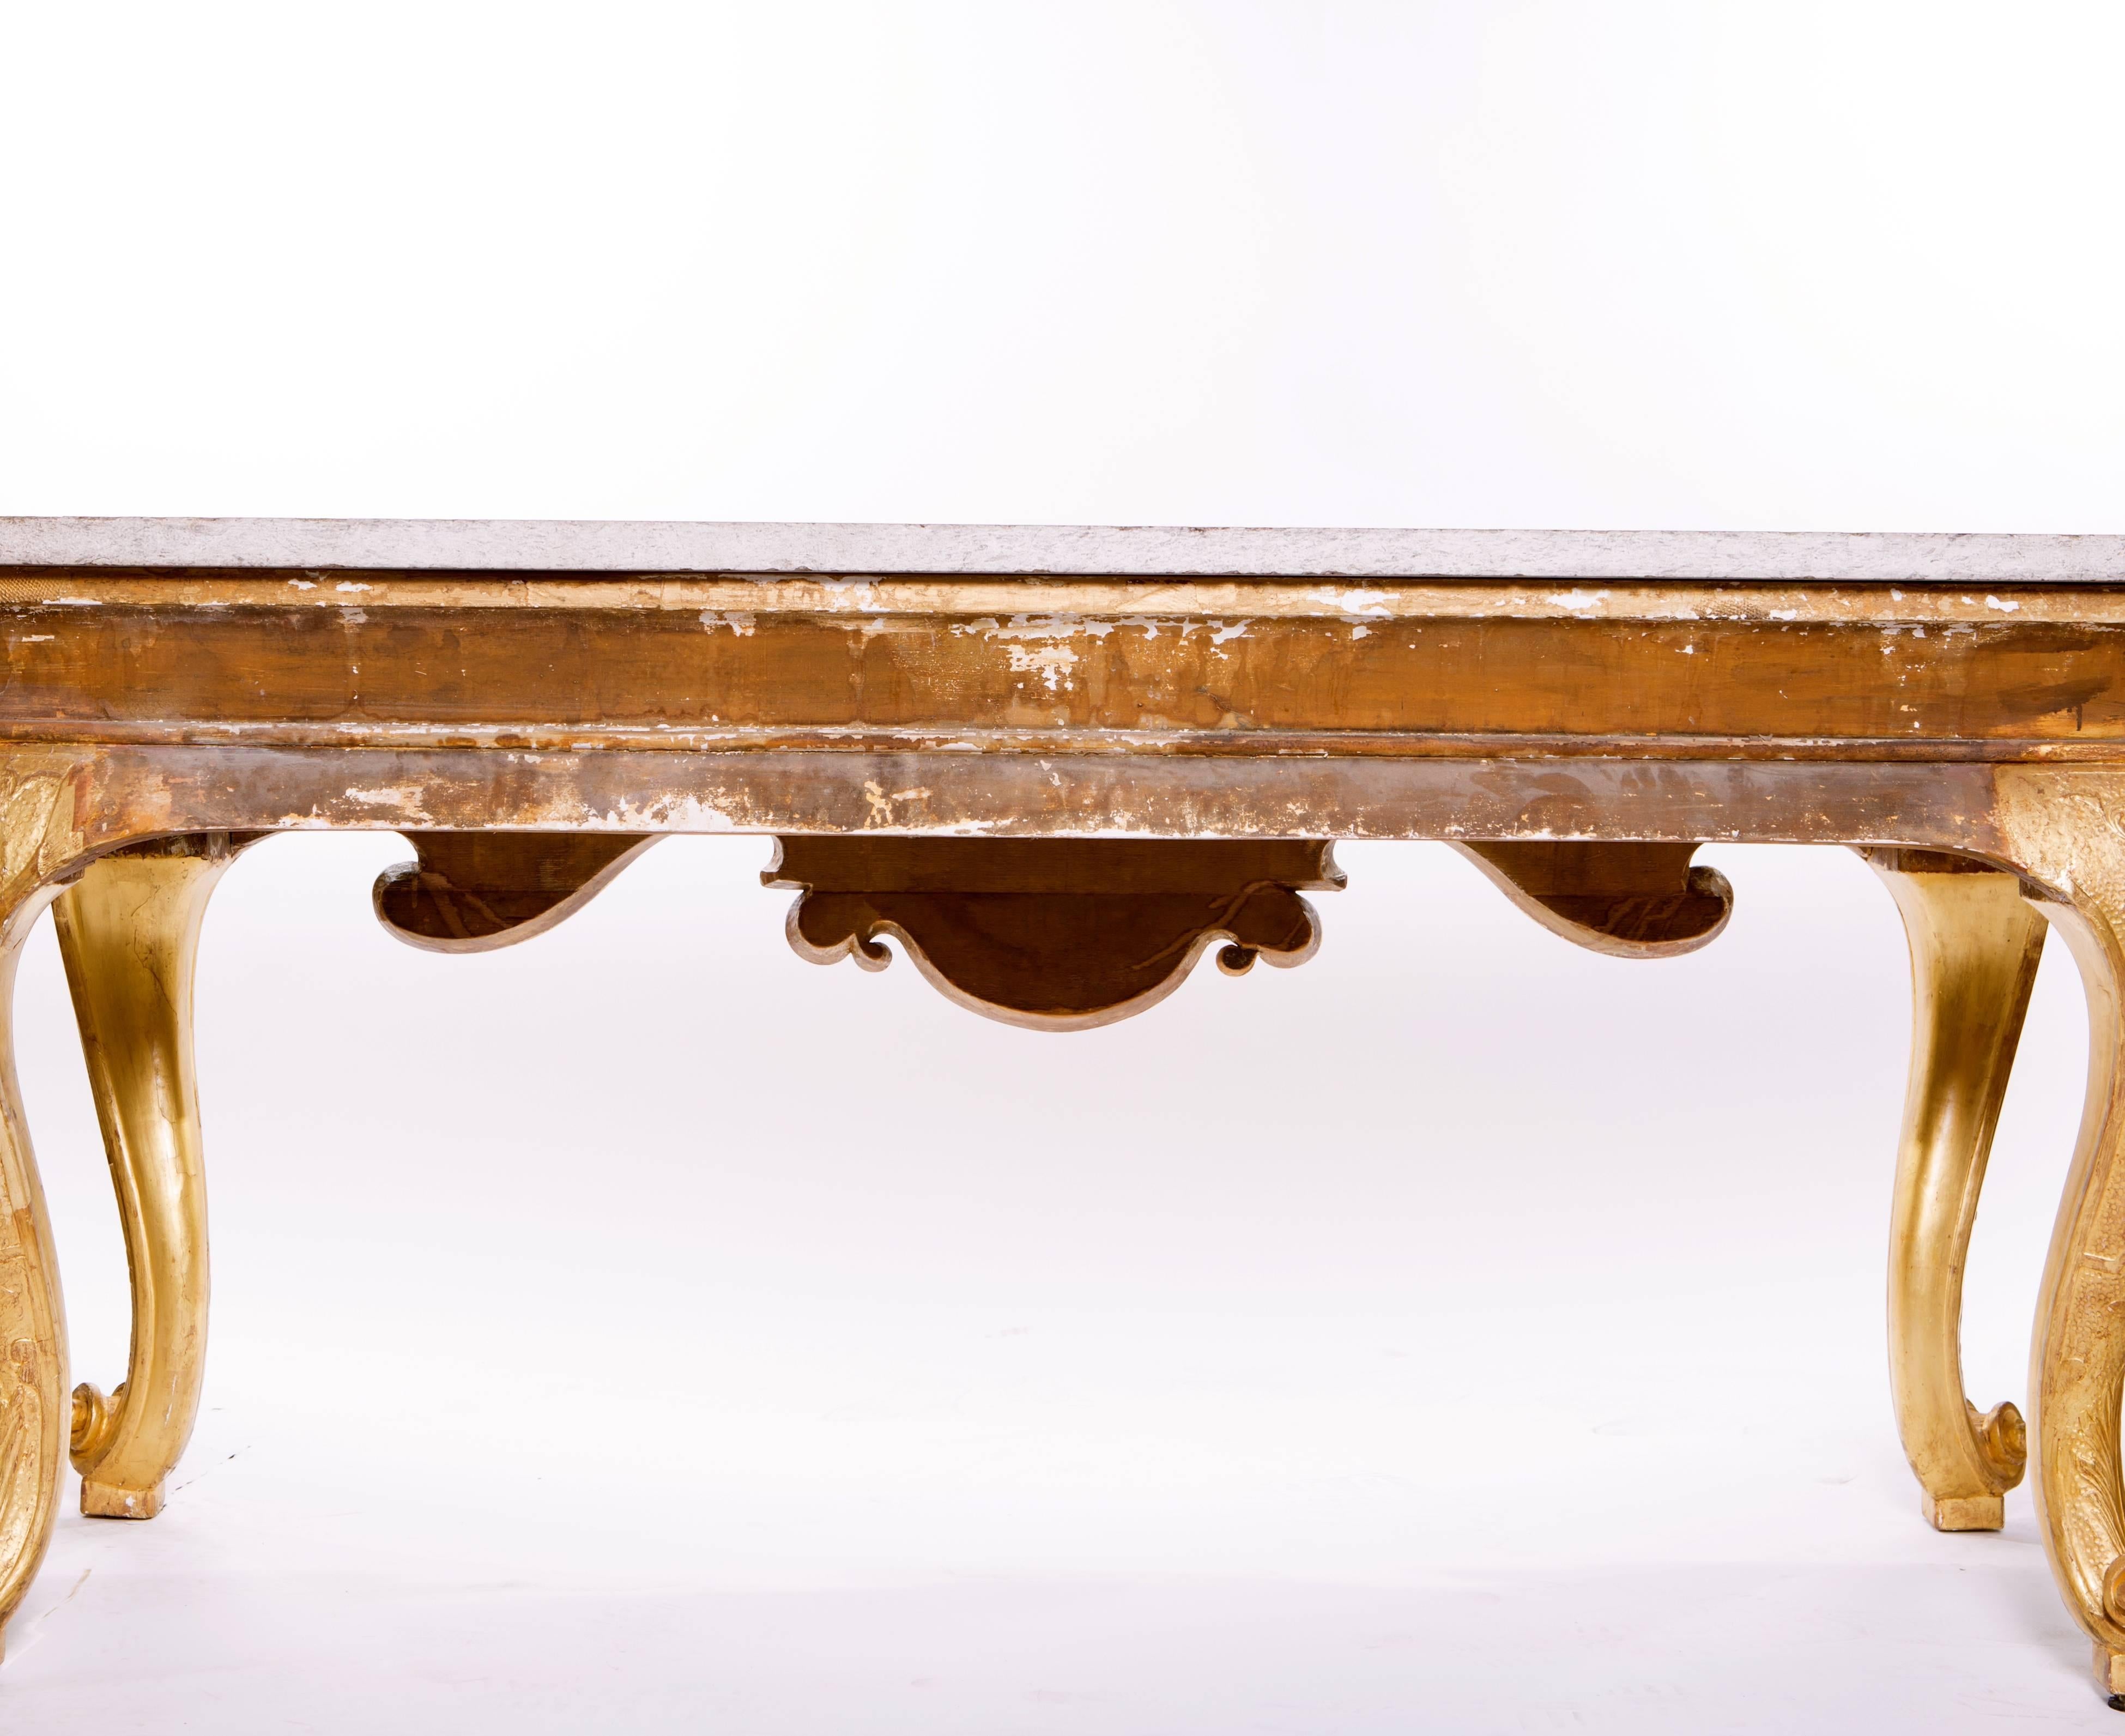 Carved Fine Early 18th Century English Georgian Gilt Gesso Strap Work Console For Sale